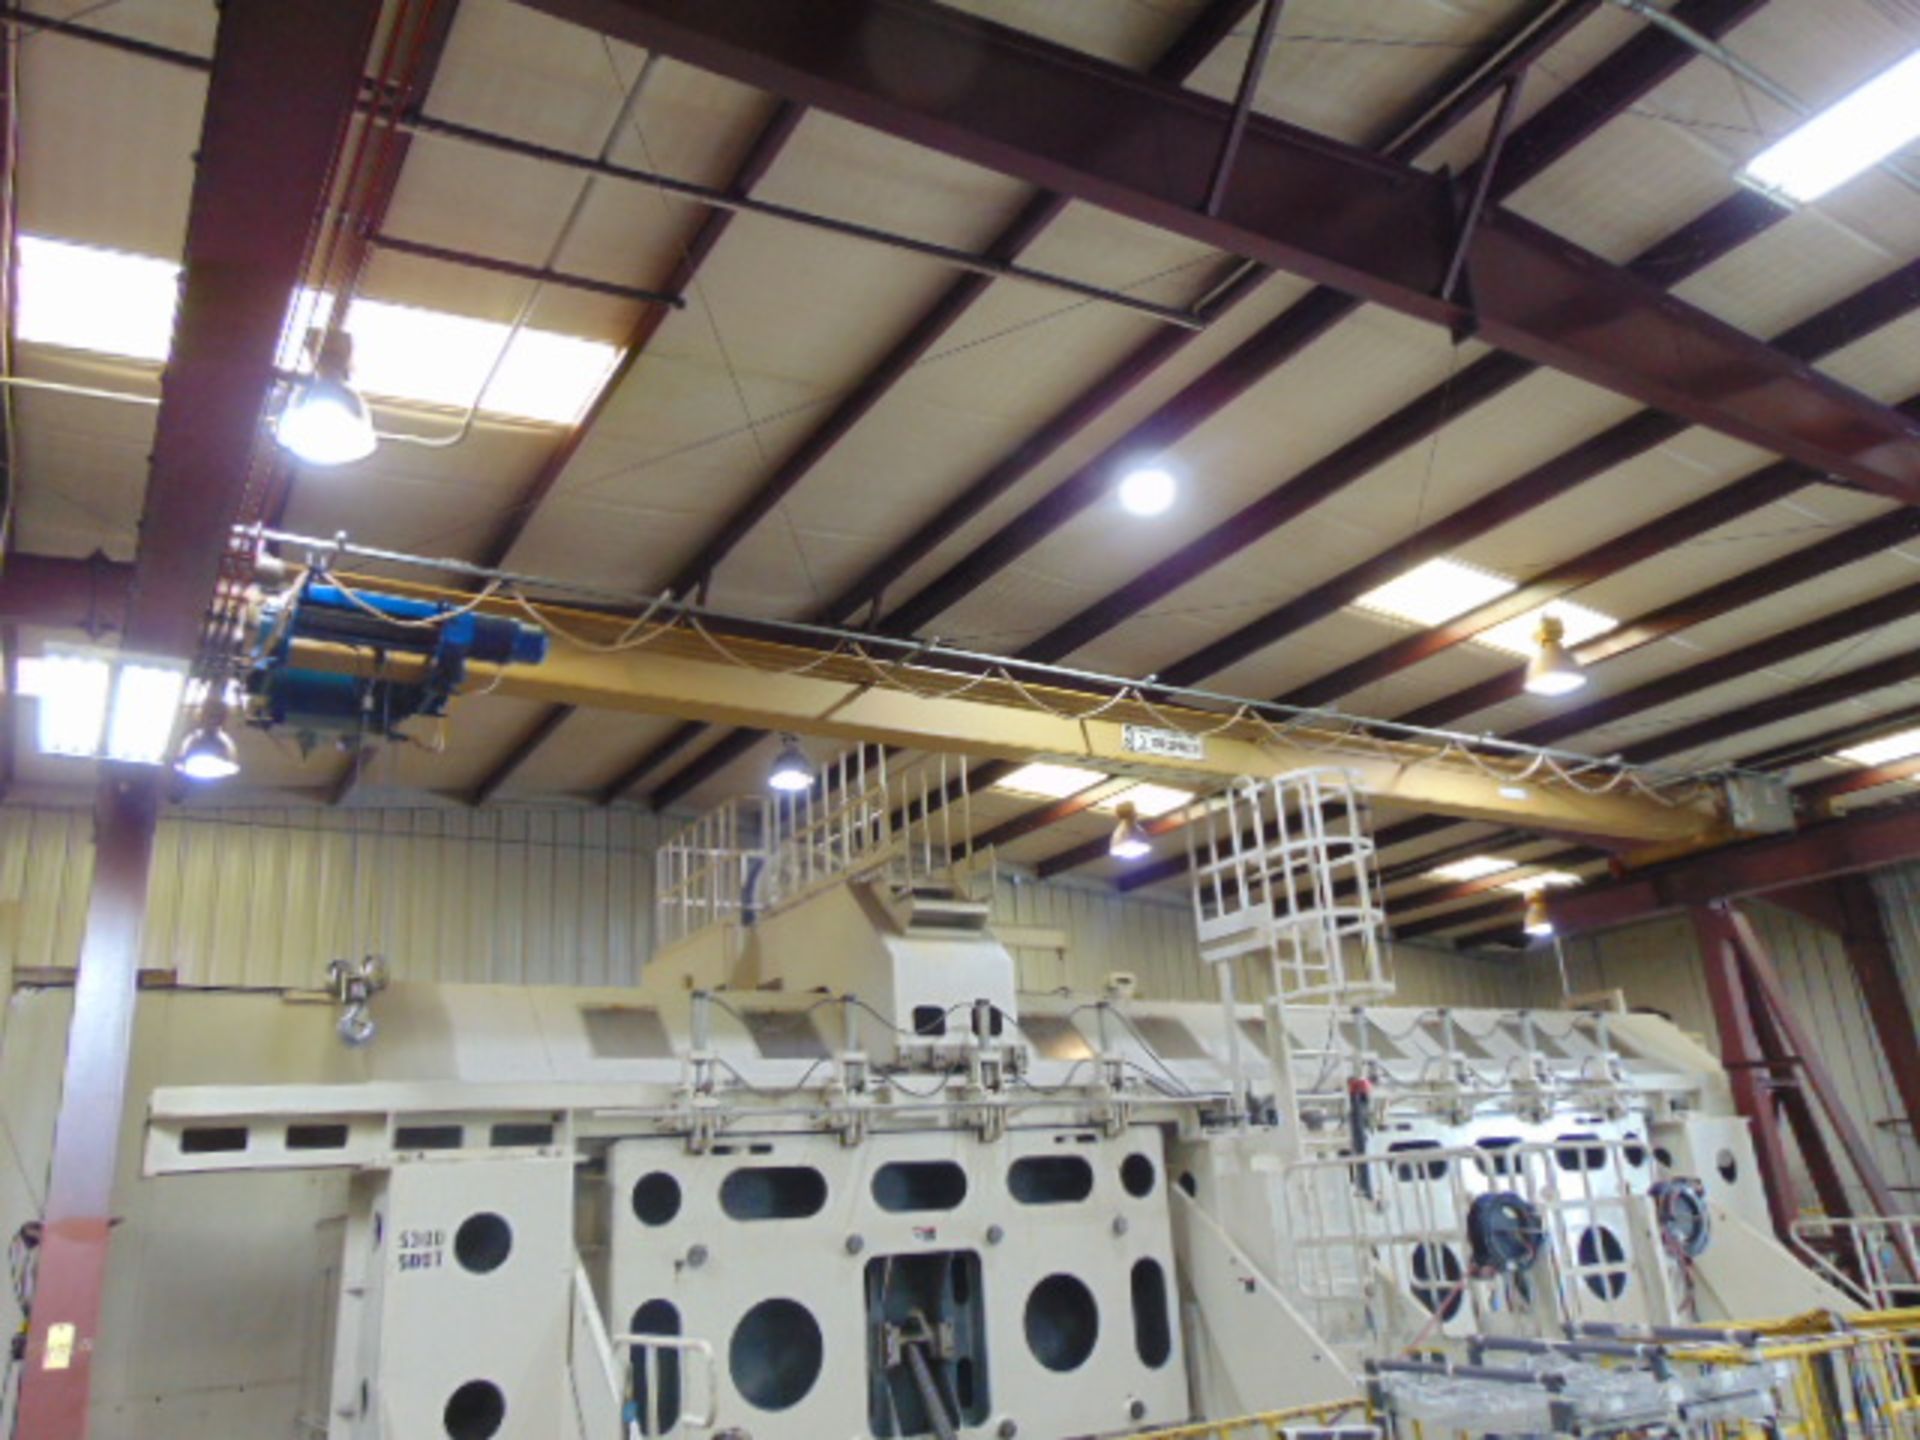 FREE STANDING BRIDGE CRANE SYSTEM, OMI CRANE SYSTEMS 3 T. X APPROX. 46’ SPAN, approx. 33’ runway